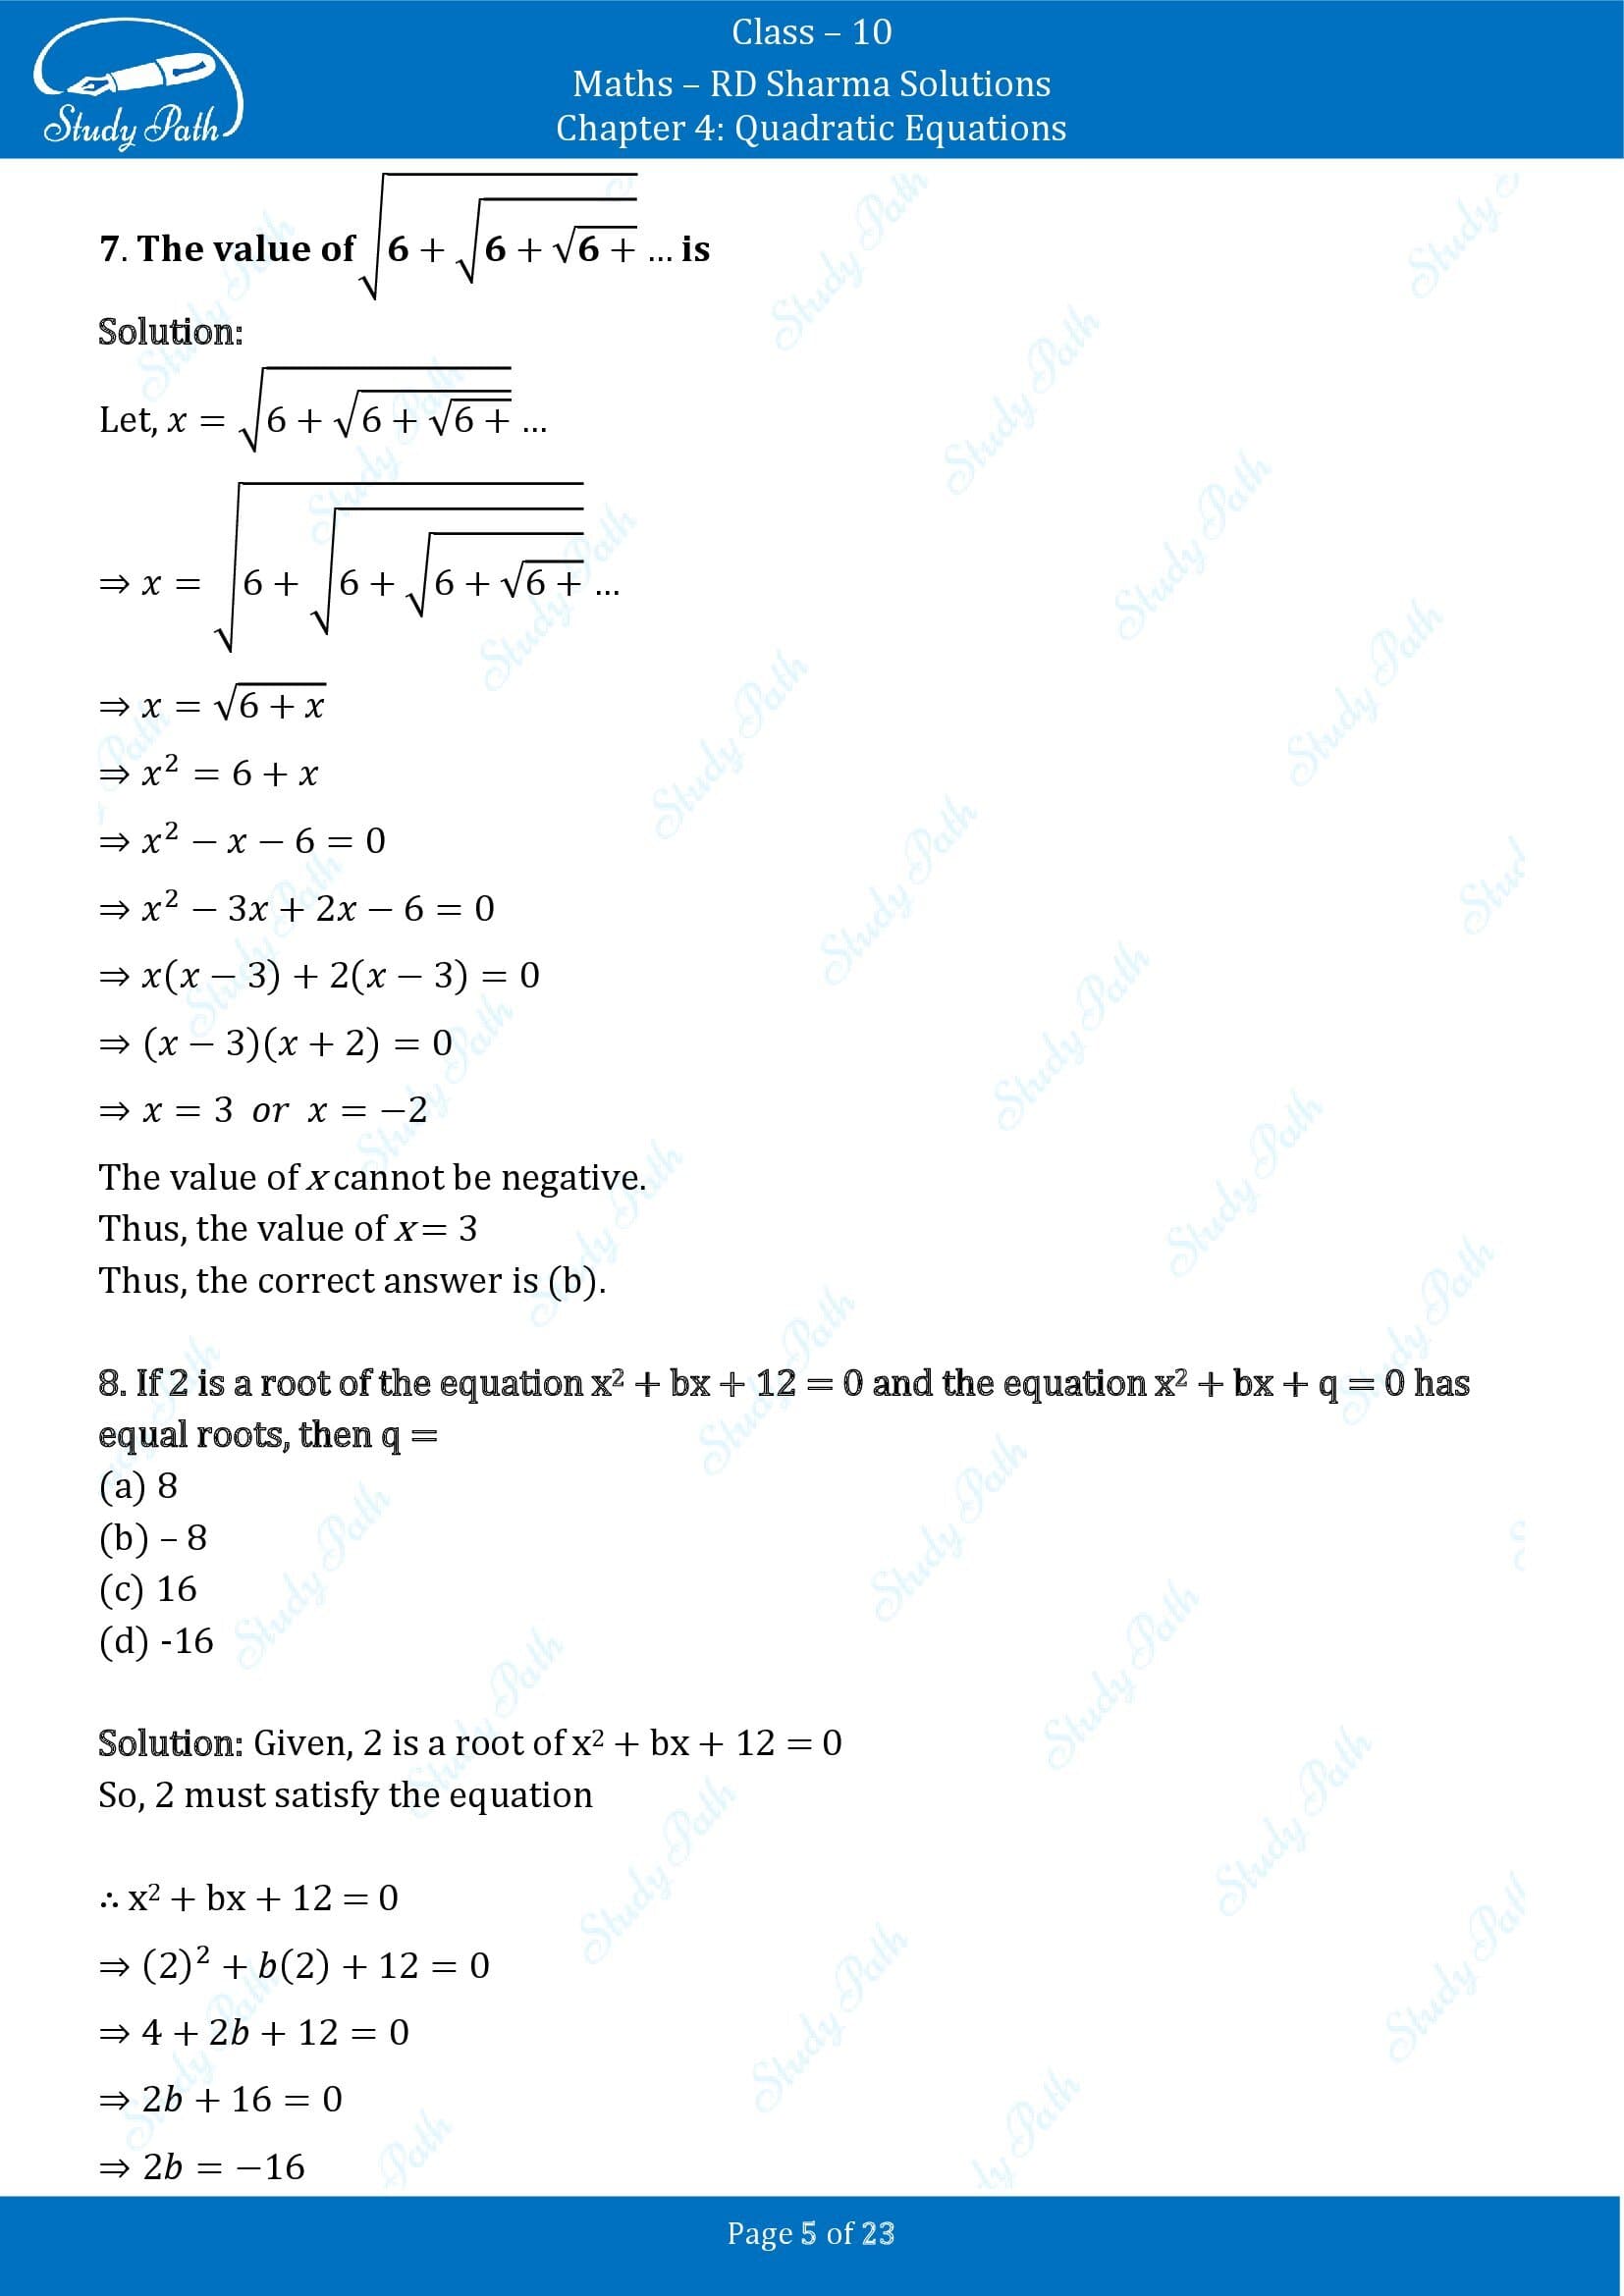 RD Sharma Solutions Class 10 Chapter 4 Quadratic Equations Multiple Choice Questions MCQs 00005